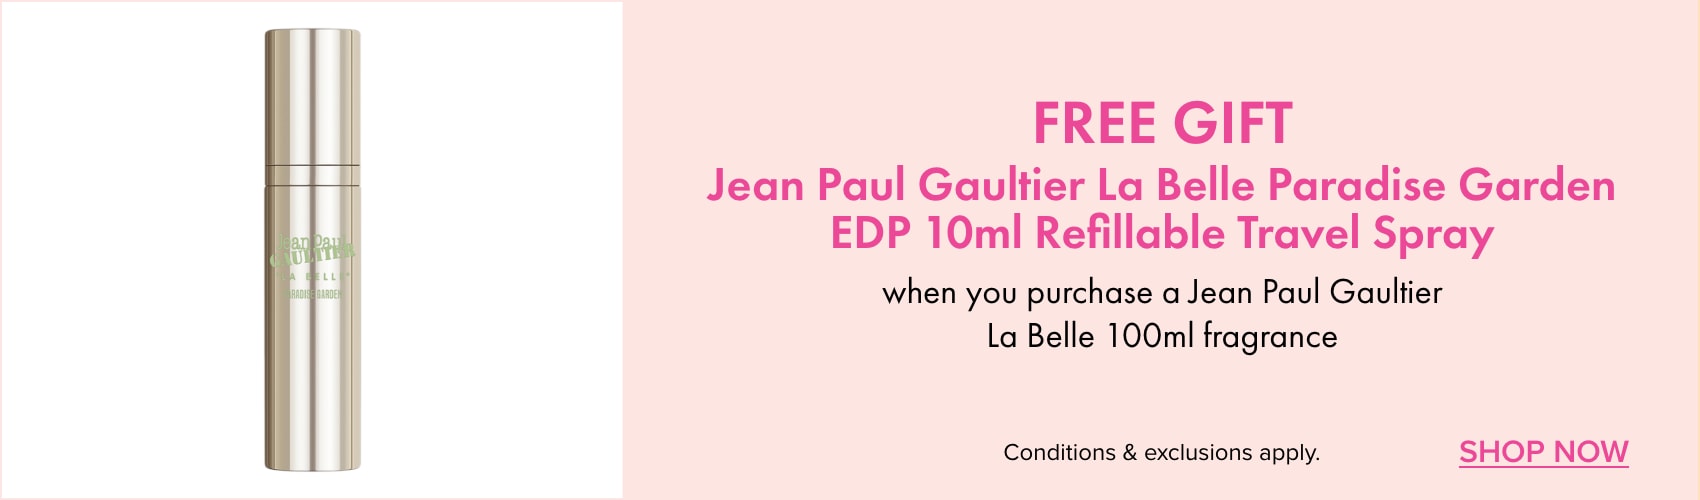 FREE GIFT Jean Paul Gaultier La Belle Paradise Garden EDP 10ml Refillable Travel Spray with your purchase of a Jean Paul Gaultier La Belle 100ml fragrance